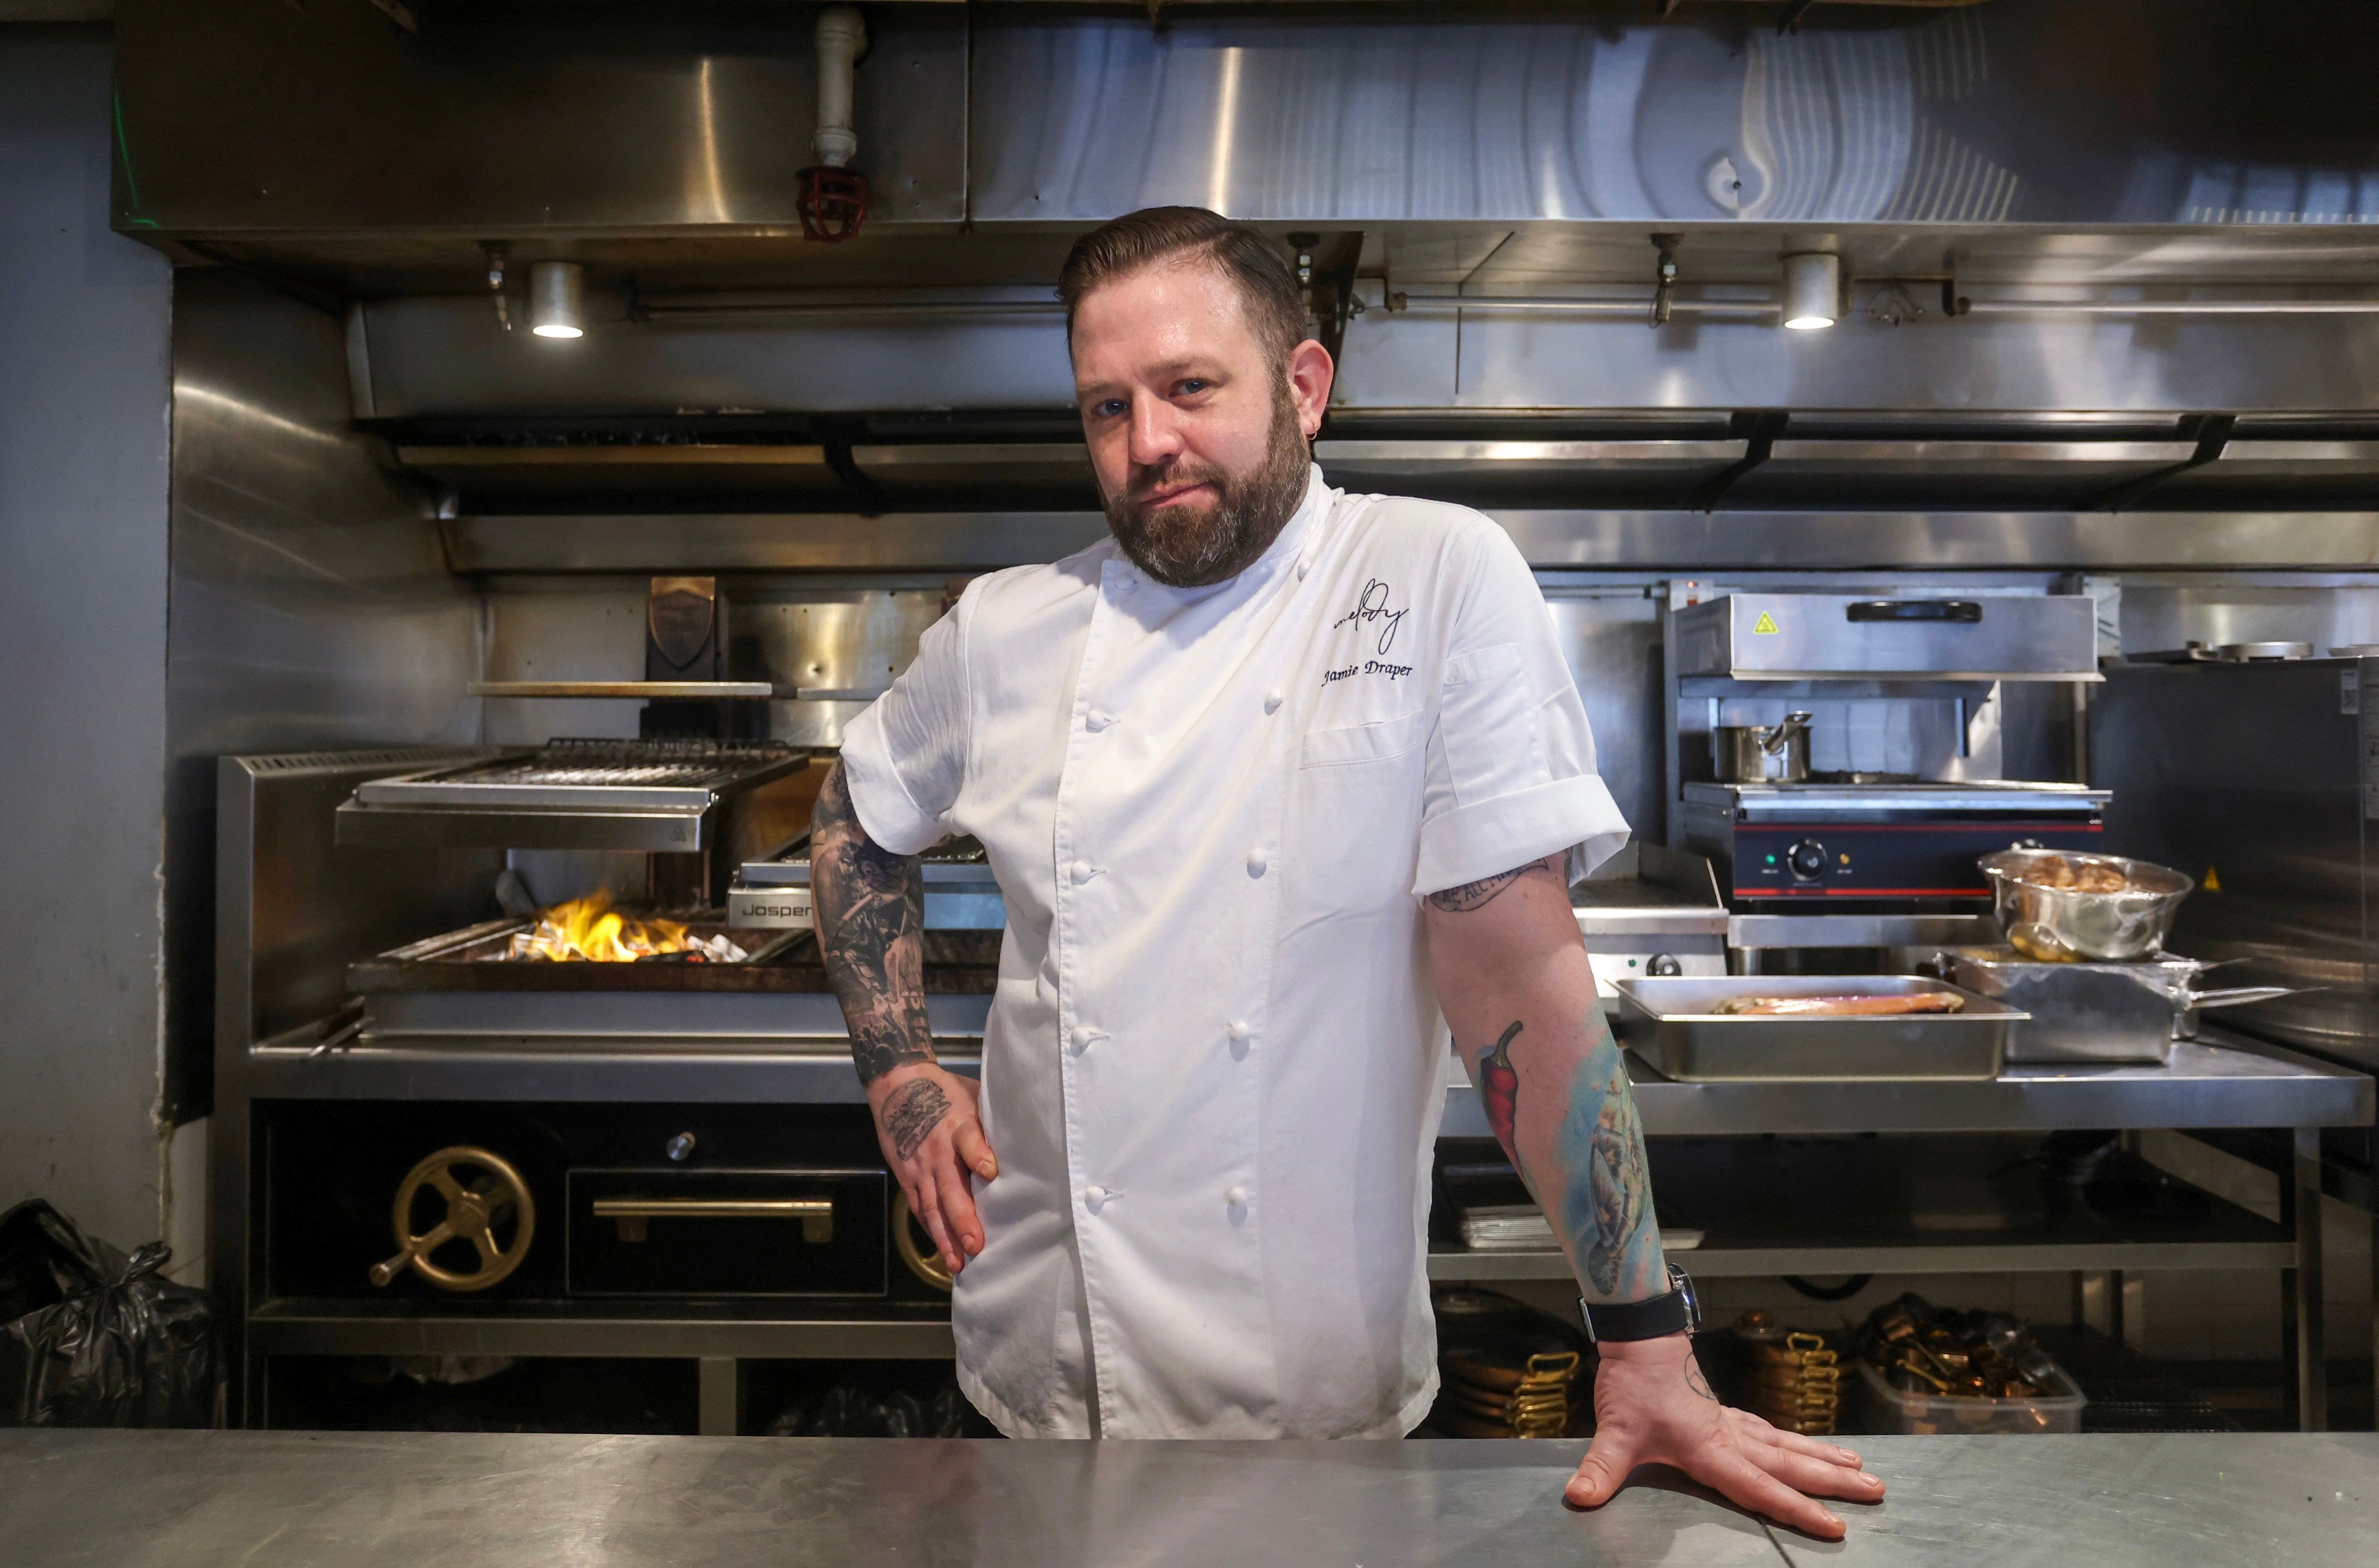 British chef Jamie Draper, previously of Mr Wolf in Hong Kong Island’s Central district and now the head of Melody in Sai Ying Pun, came to Hong Kong from London to escape burnout. He talks about taking a “less is more” approach to food in his new role. Photo: Jonathan Wong